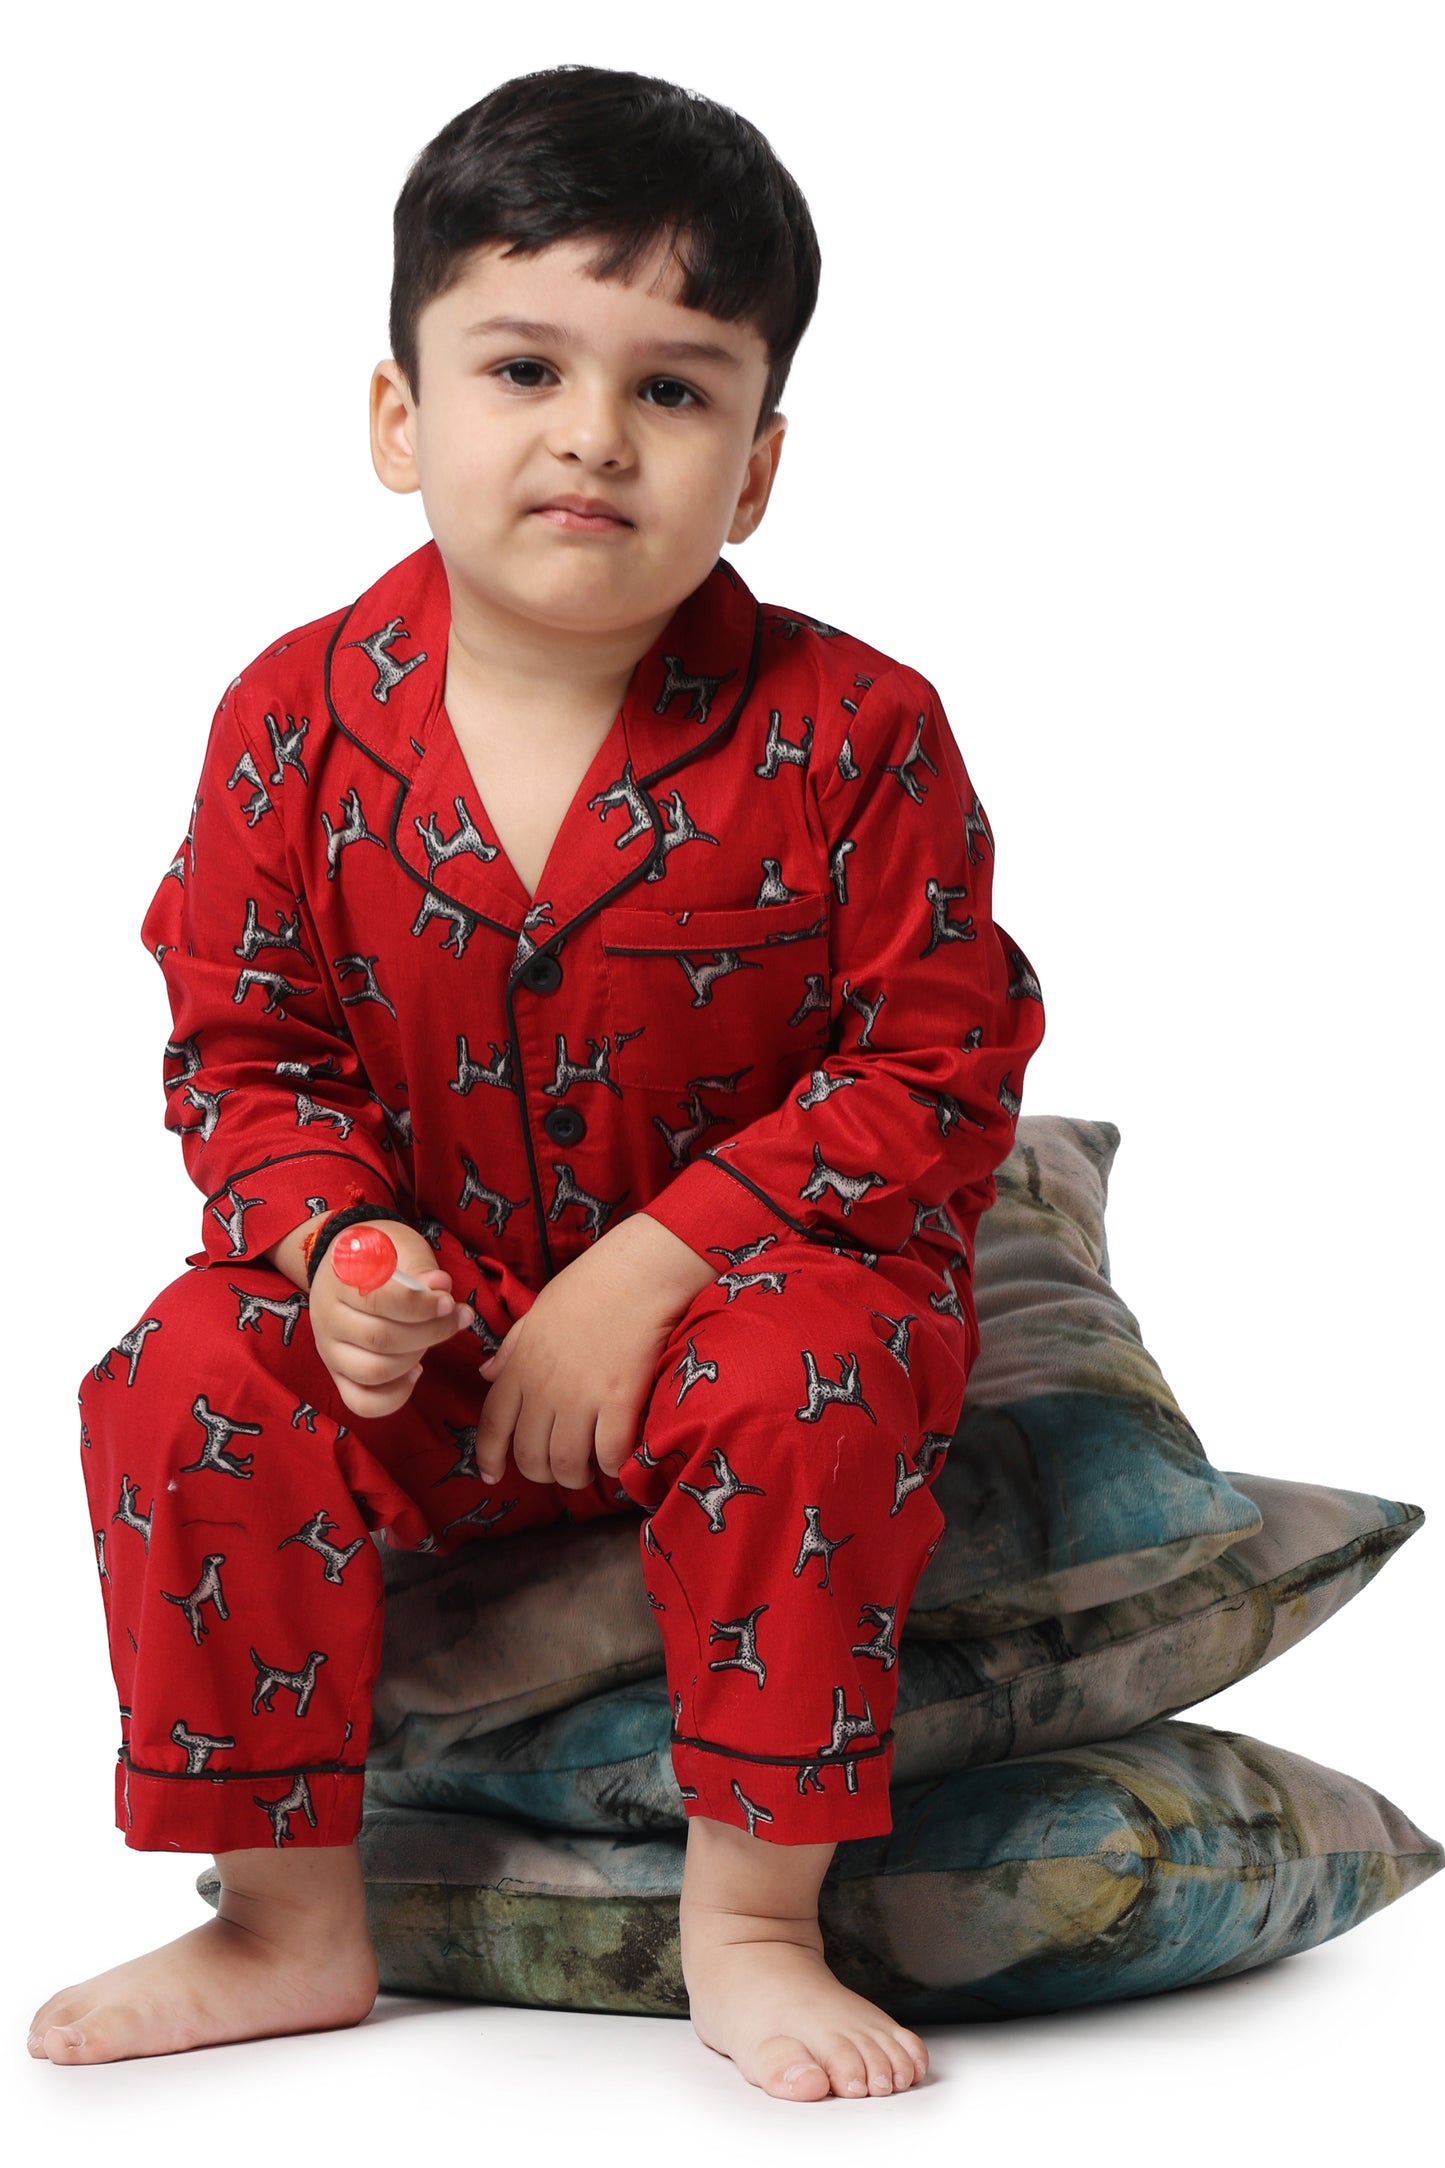 Red Night Suit - Printed